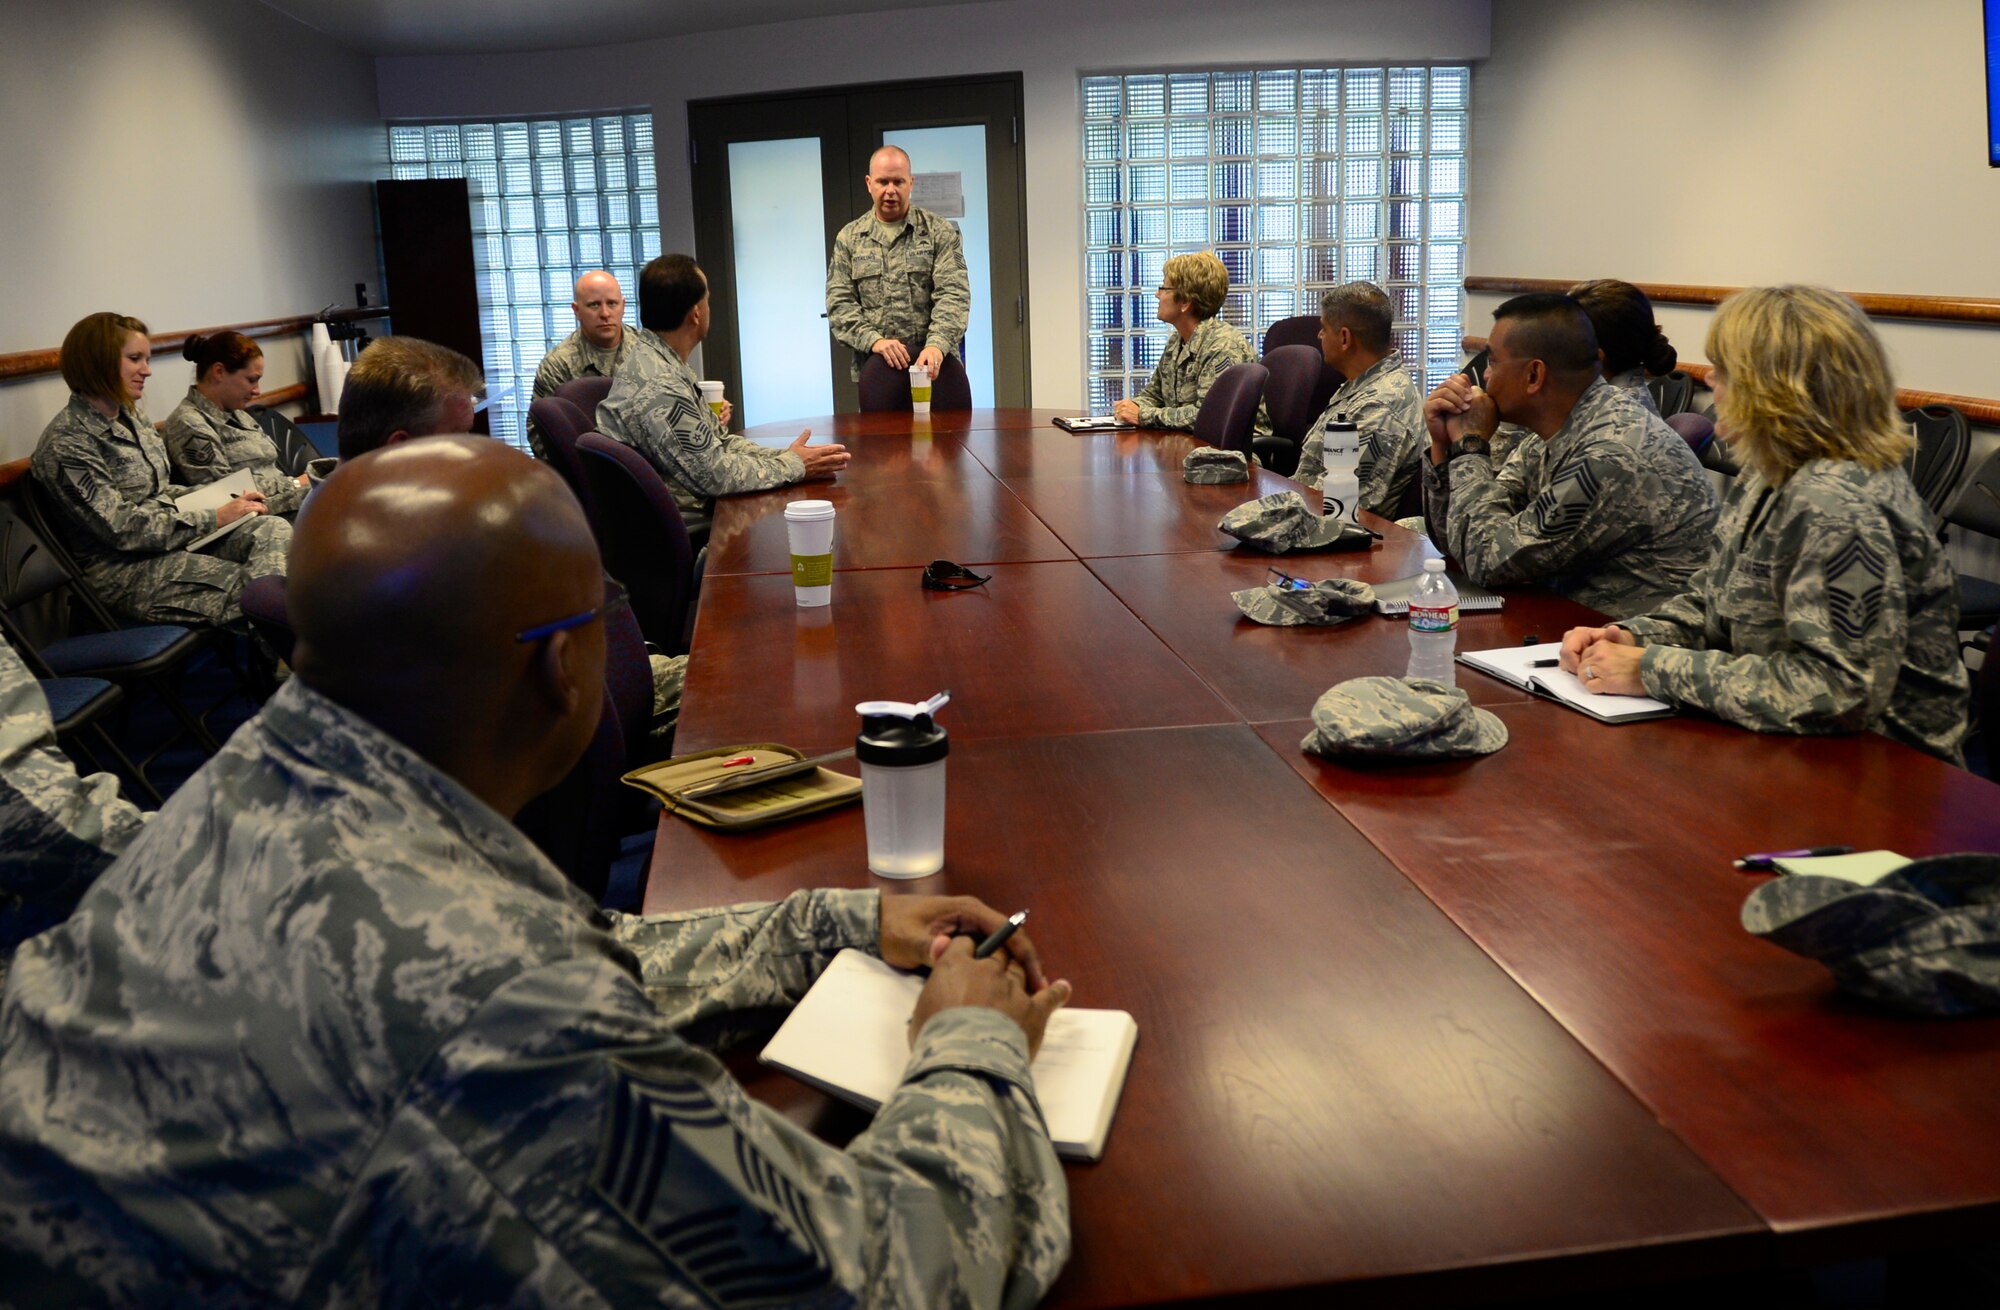 Air National Guard Command Chief James W. Hotaling speaks to the 129th Rescue Wing Chiefs’ Group during a visit to Moffet Federal Airfield, Calif., July 11, 2014. Hotaling spoke to Airmen about the past, present and future of the ANG. (U.S. Air National Guard photo by Tech. Sgt. Ray Aquino/Released)